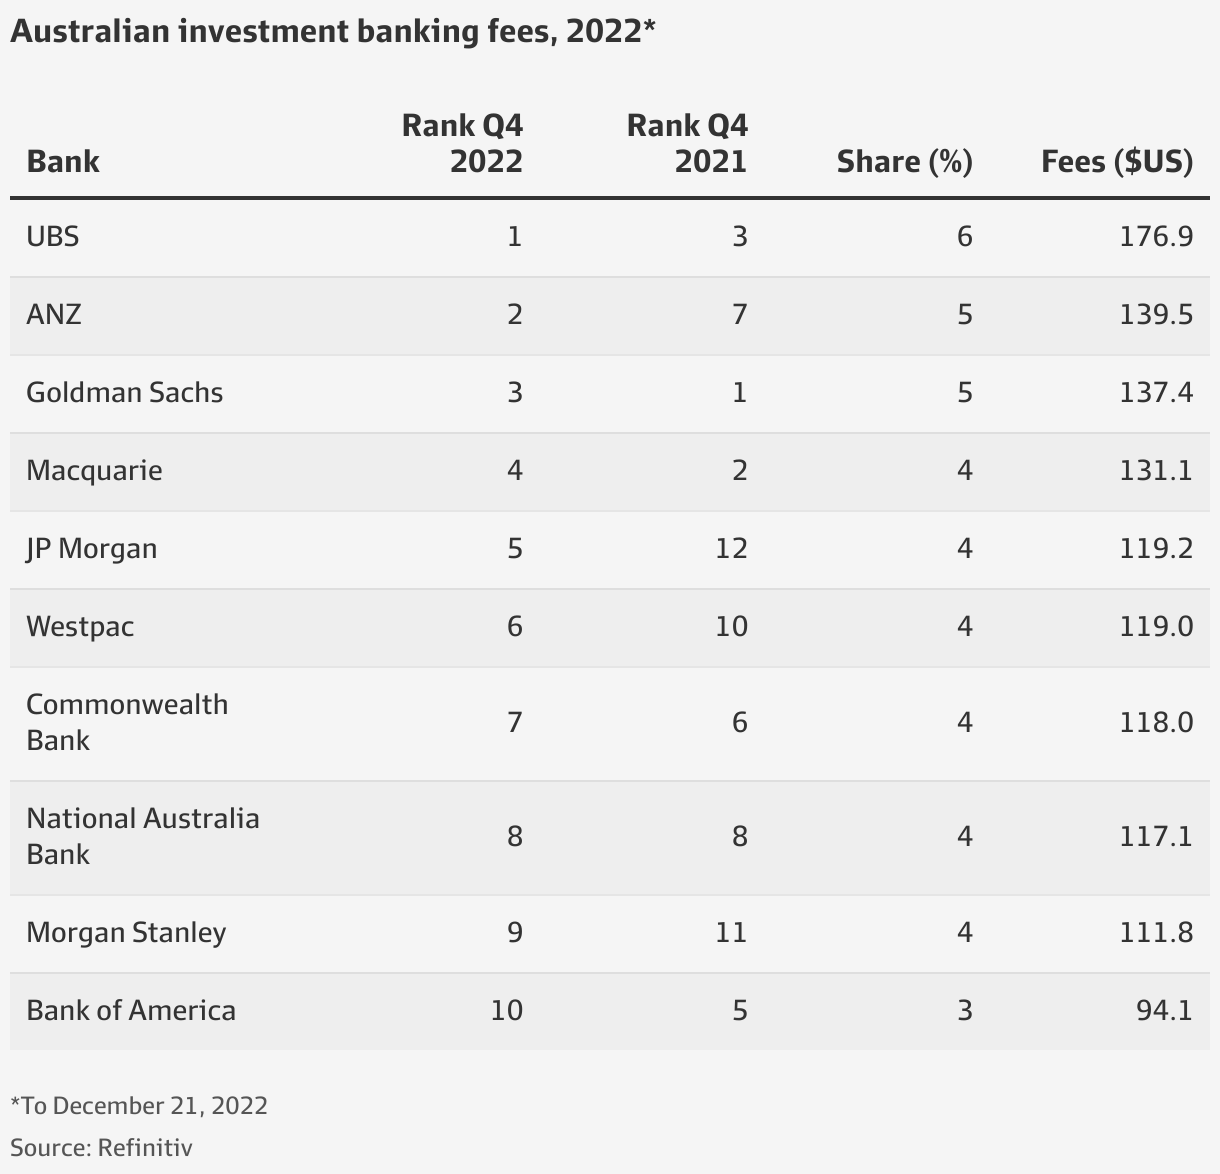 UBS, ANZ, Goldman Sachs top investment banking fee league tables for Australian sector